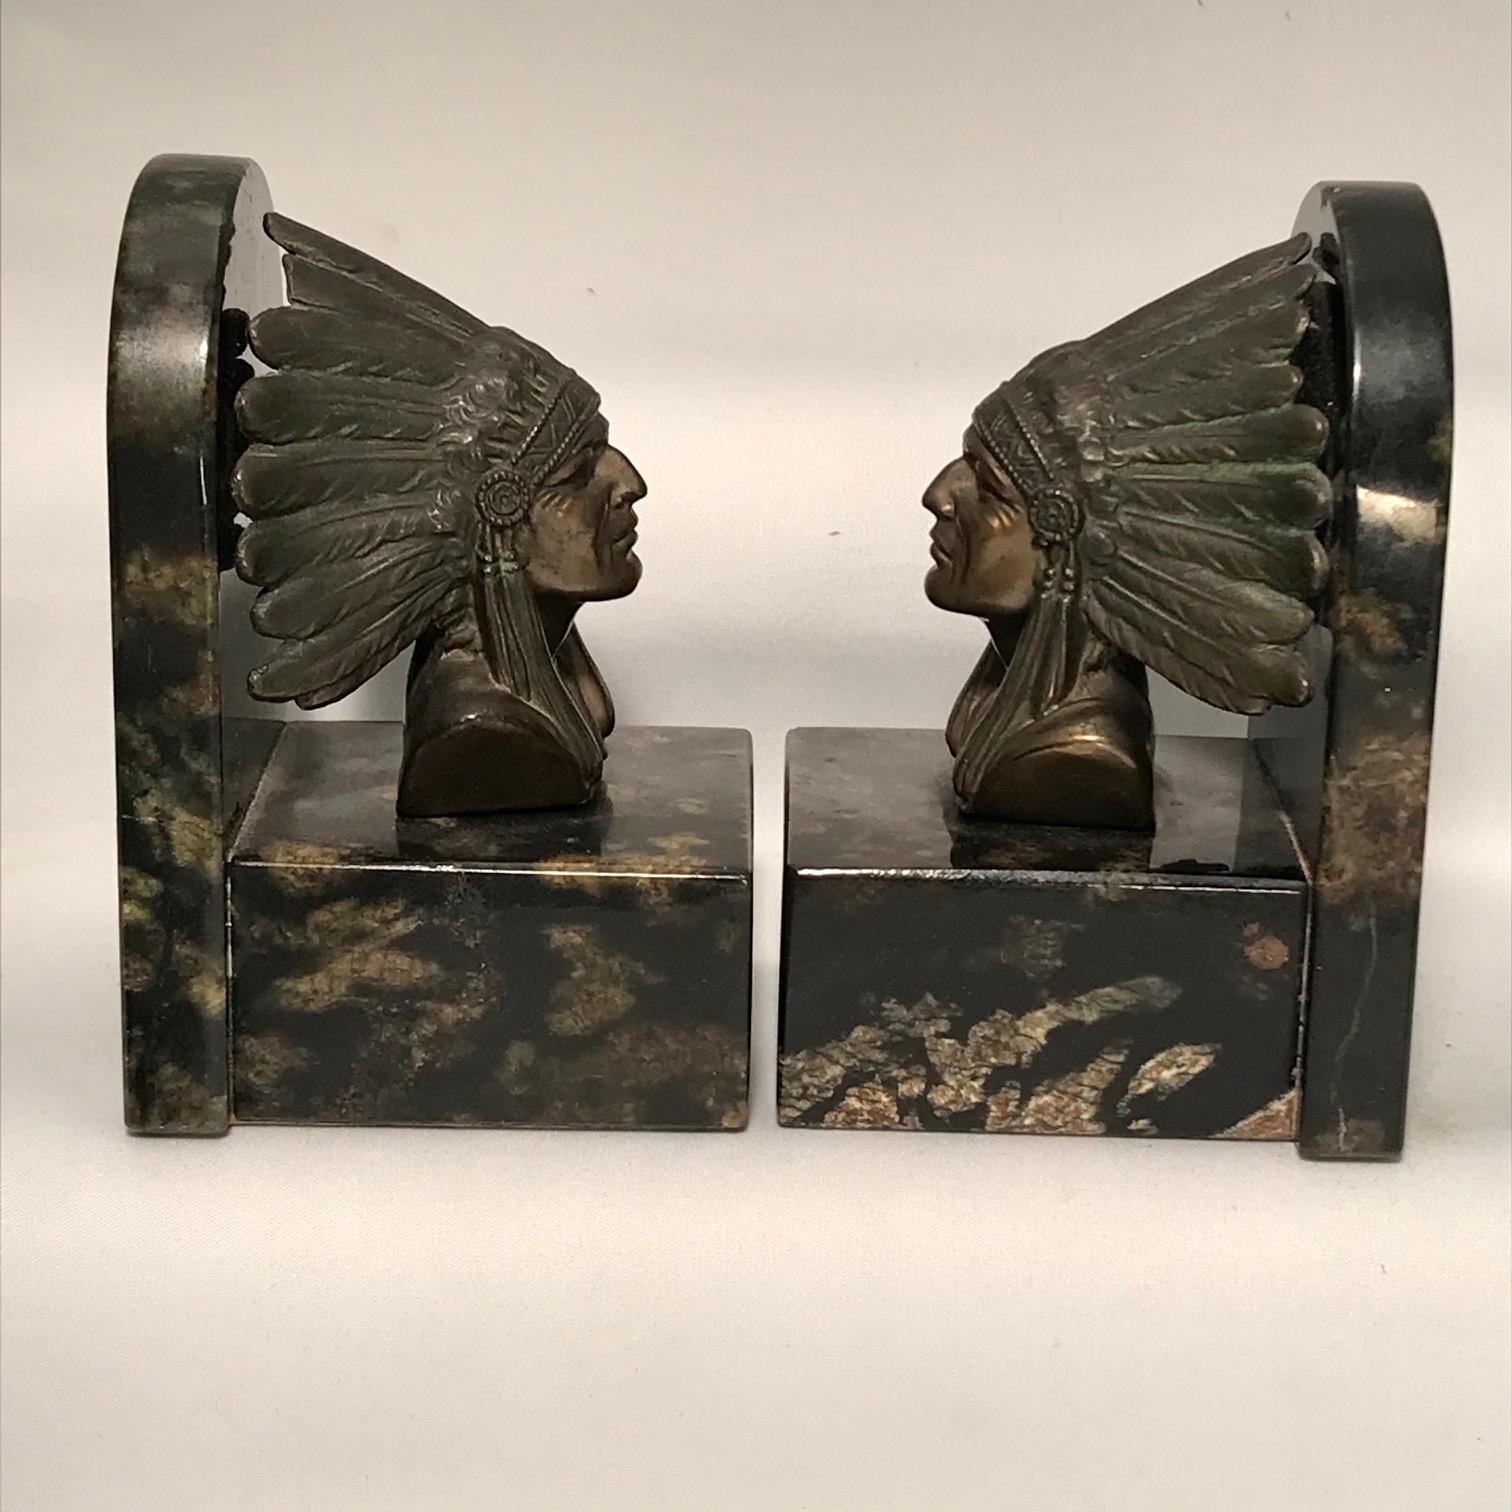 Early 20th Century Pair of Art Deco Bookends in Bronze and Marble, Modelled with Chieftains